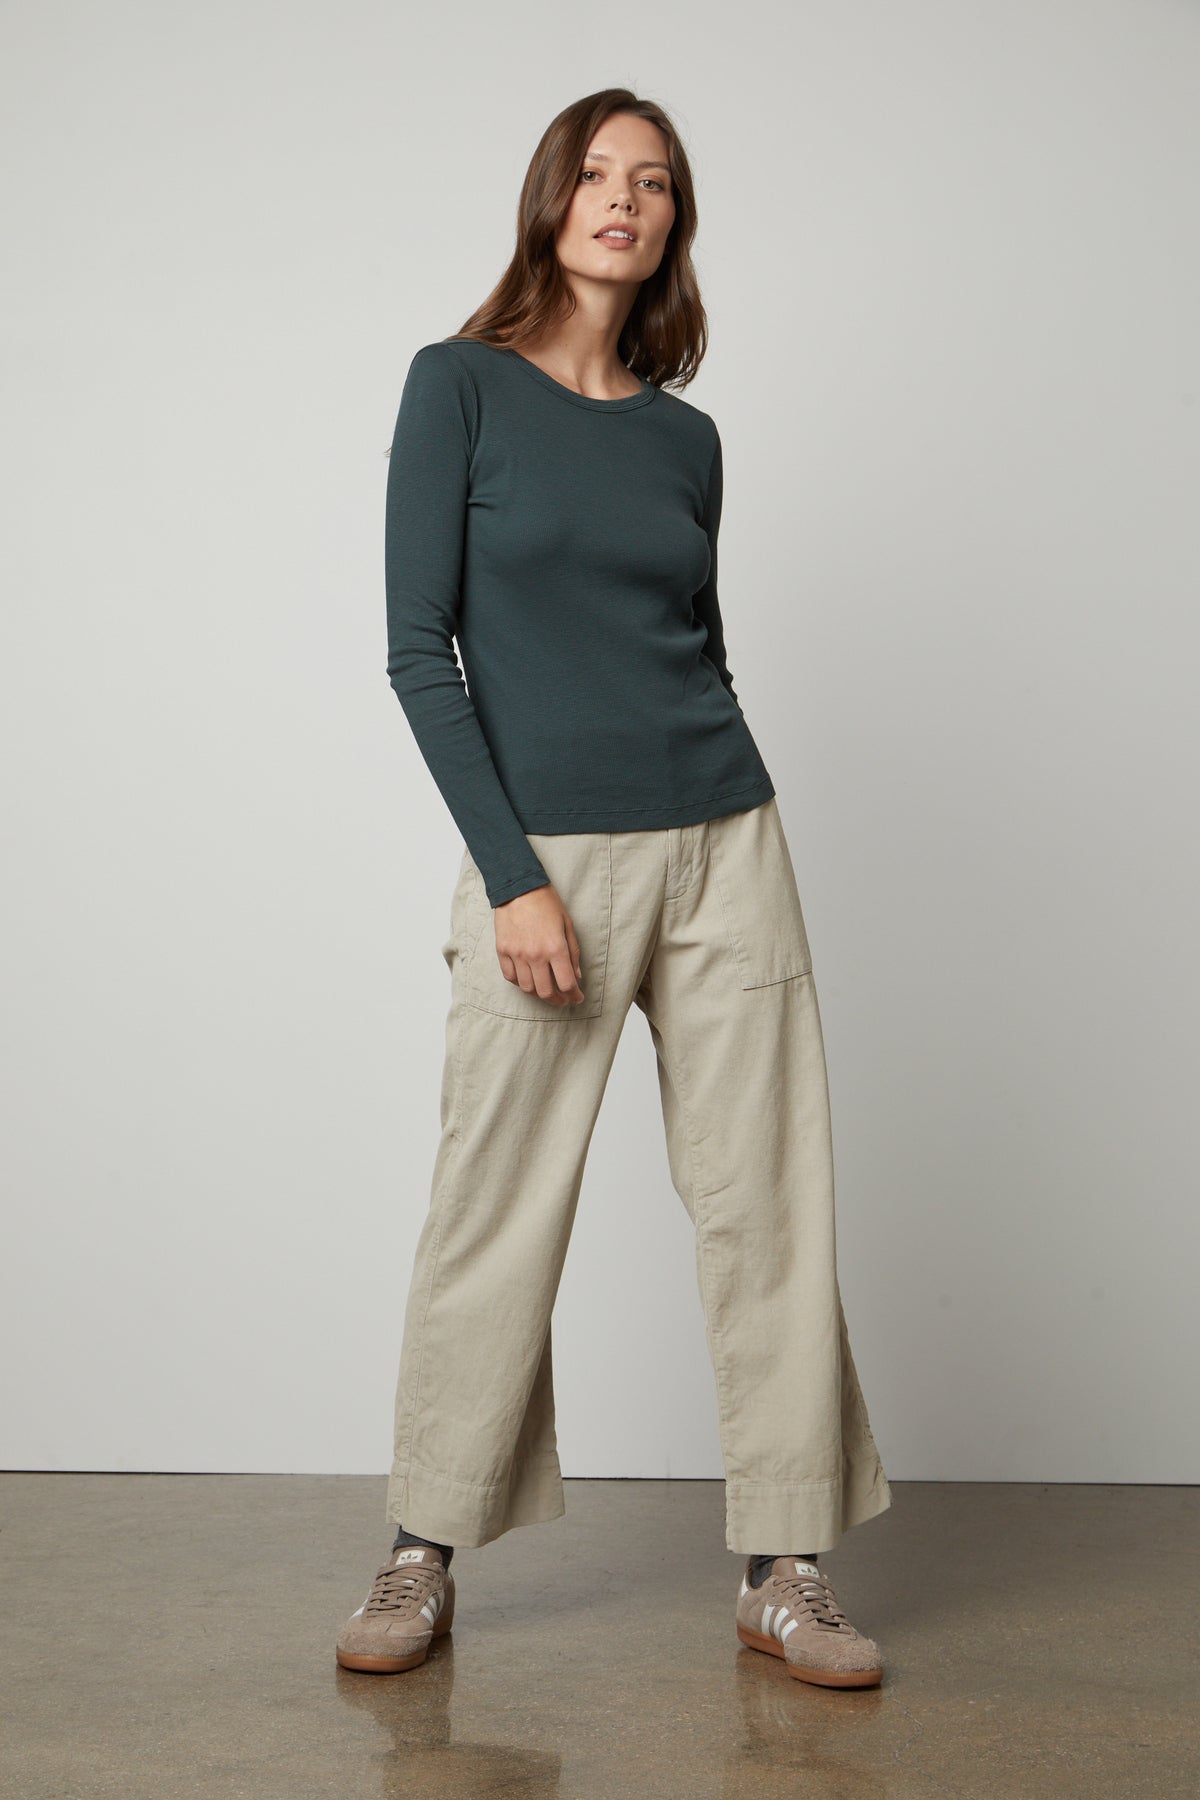 The model is wearing a Velvet by Graham & Spencer BAYLER RIBBED SCOOP NECK TEE and khaki pants.-35782696730817